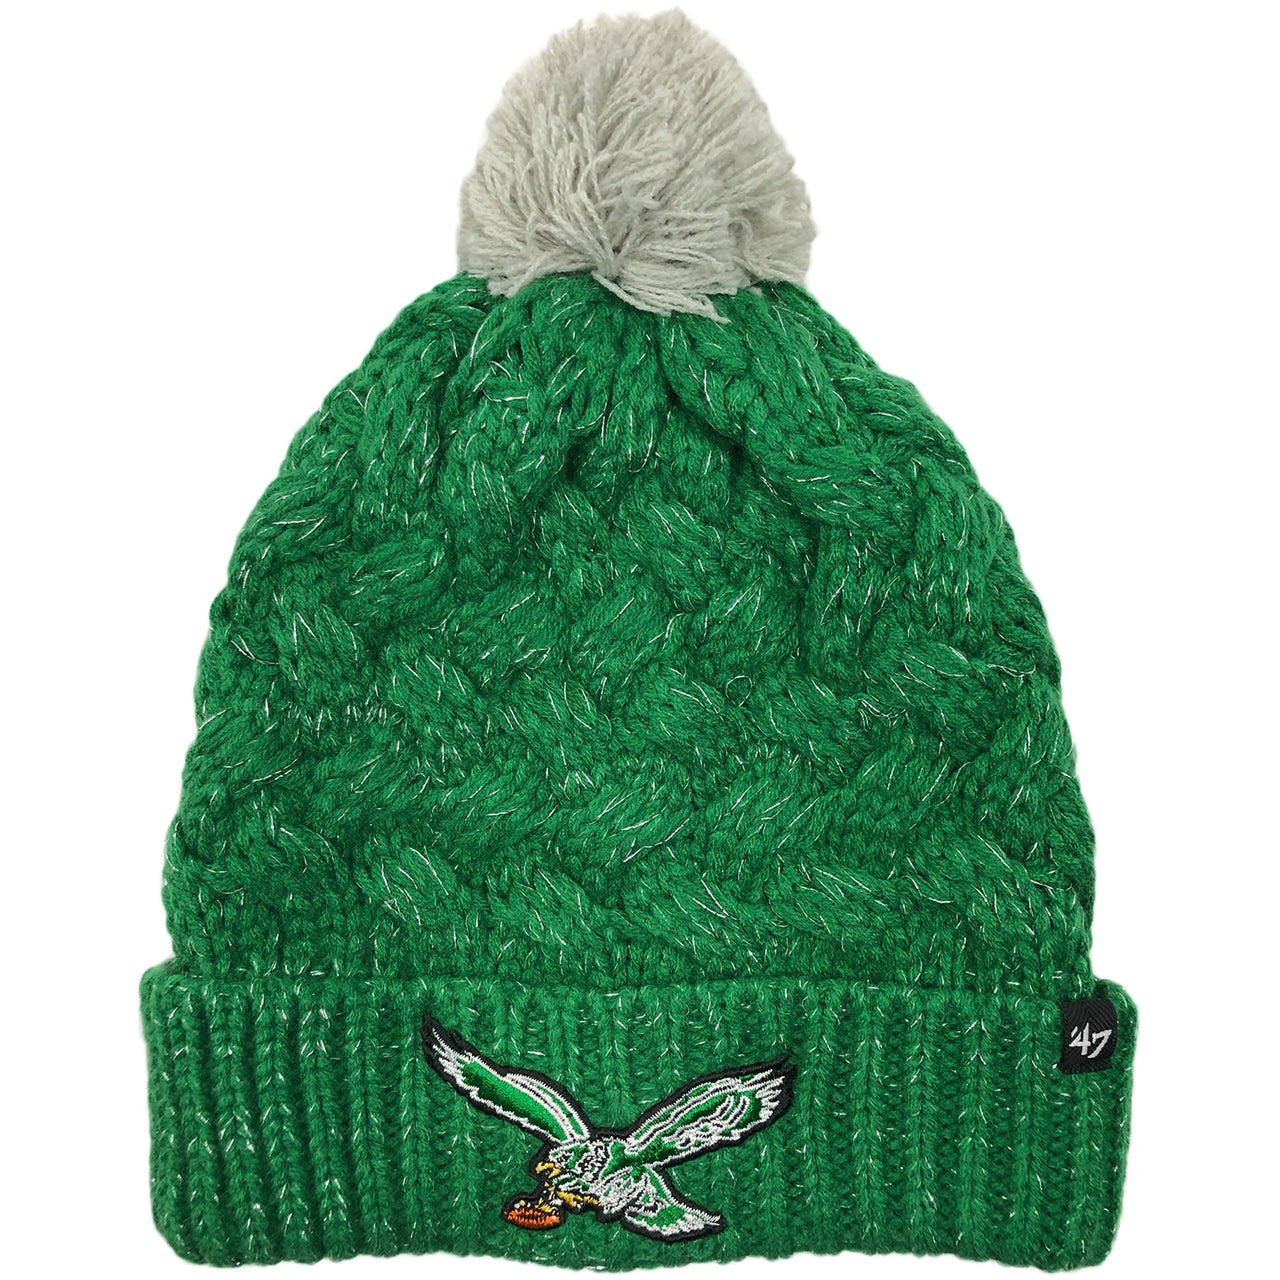 The women's throwback kelly green Philadelphia Eagles knit pom beanie is kelly green and silver with the vintage Eagles logo embroidered on the front in kelly green, white, and black.